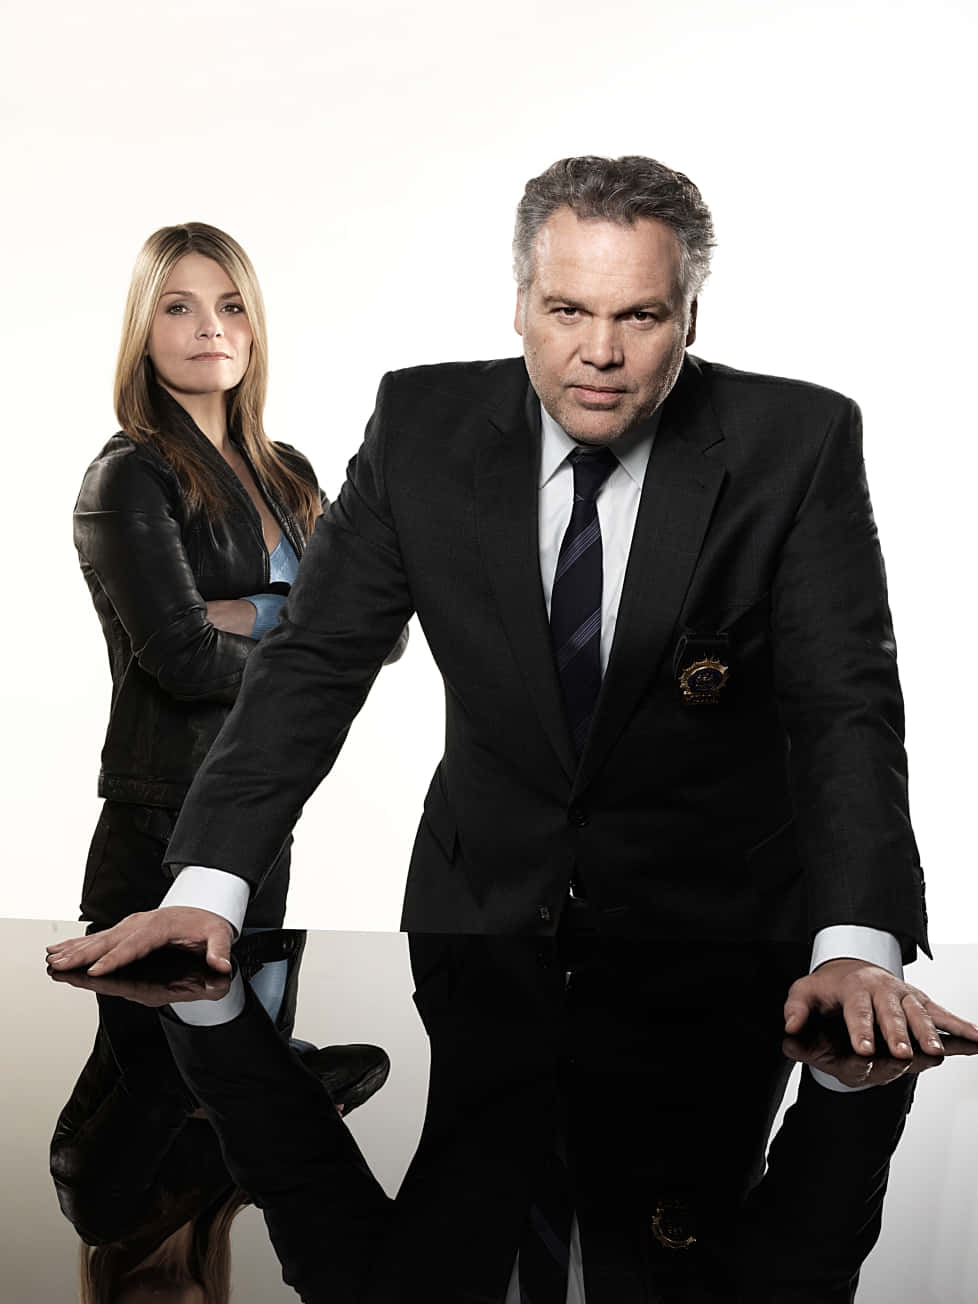 Vincent D'Onofrio striking a pose in a black jacket Wallpaper